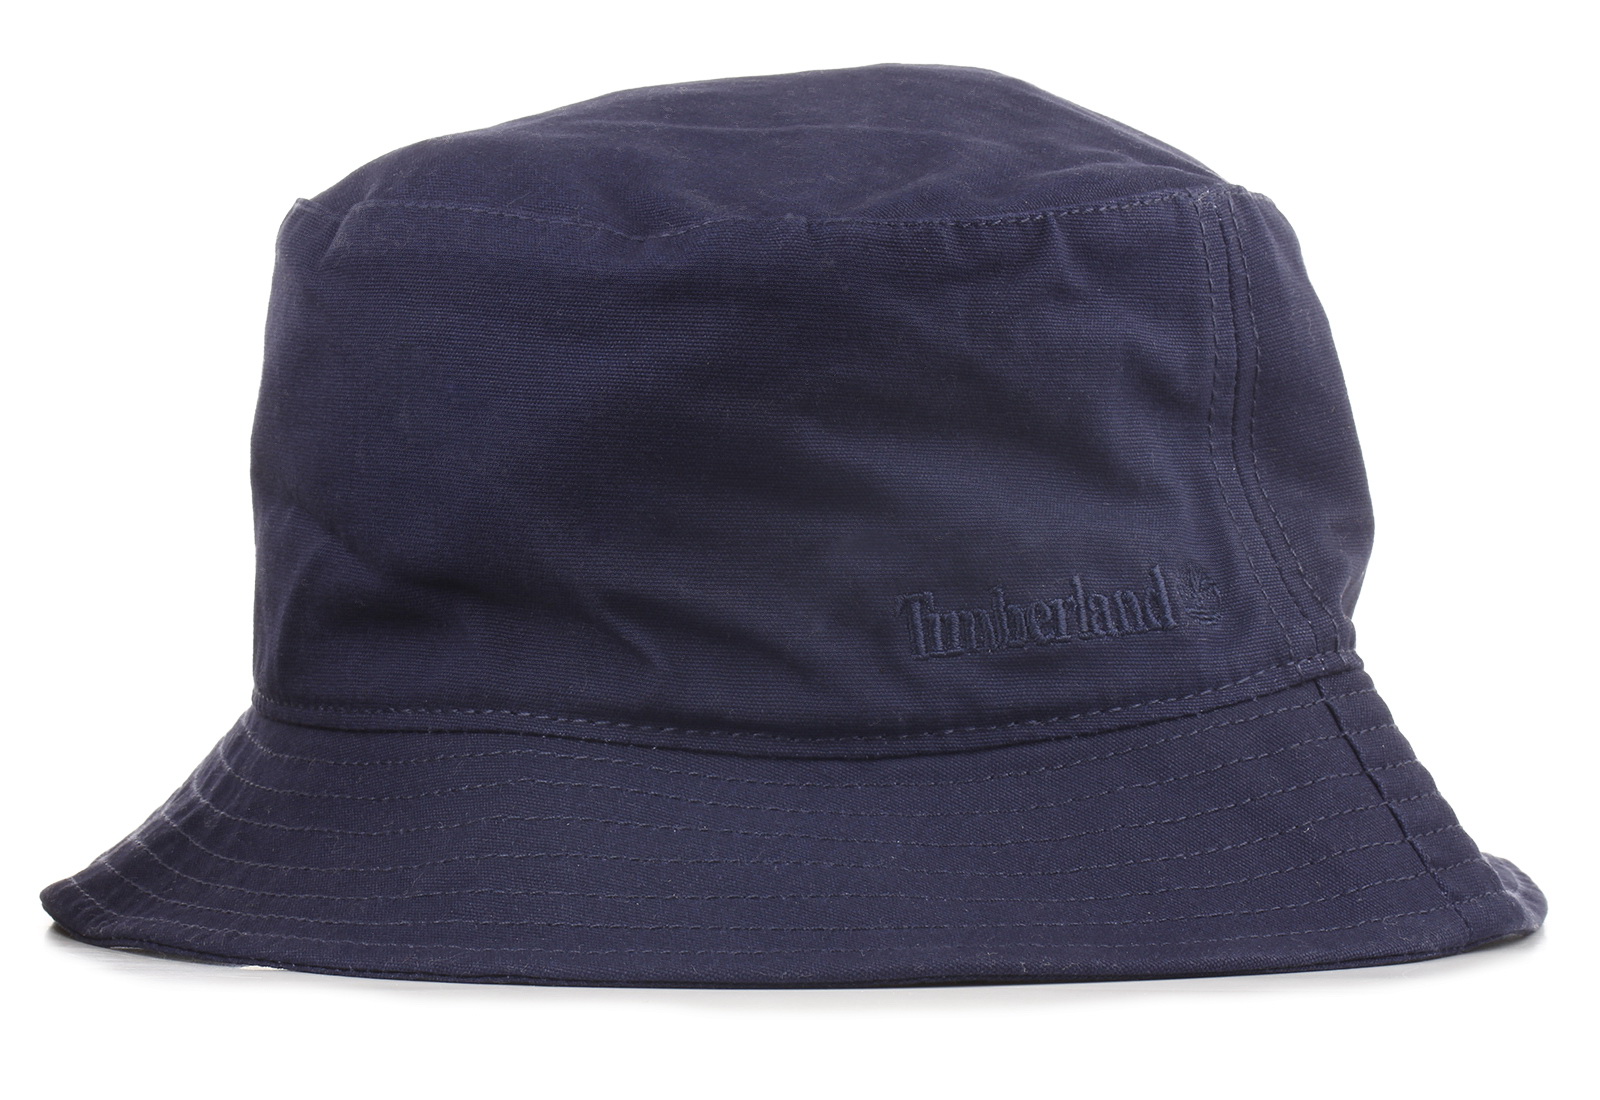 Timberland Haine Peached Bucket Hat